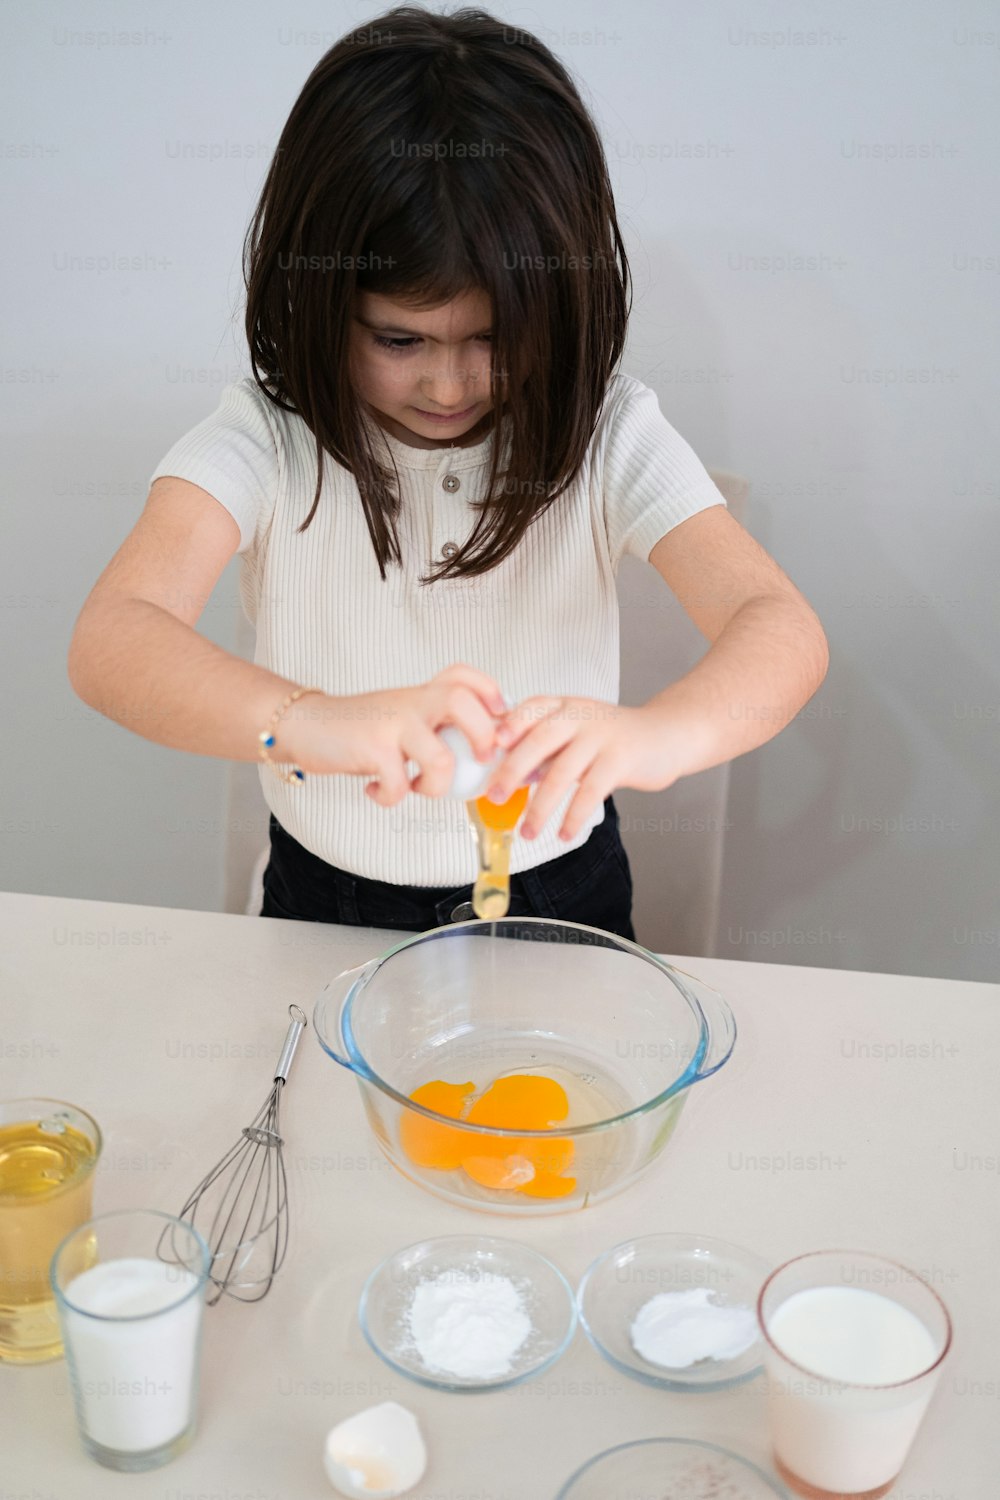 a young girl mixing ingredients in a bowl